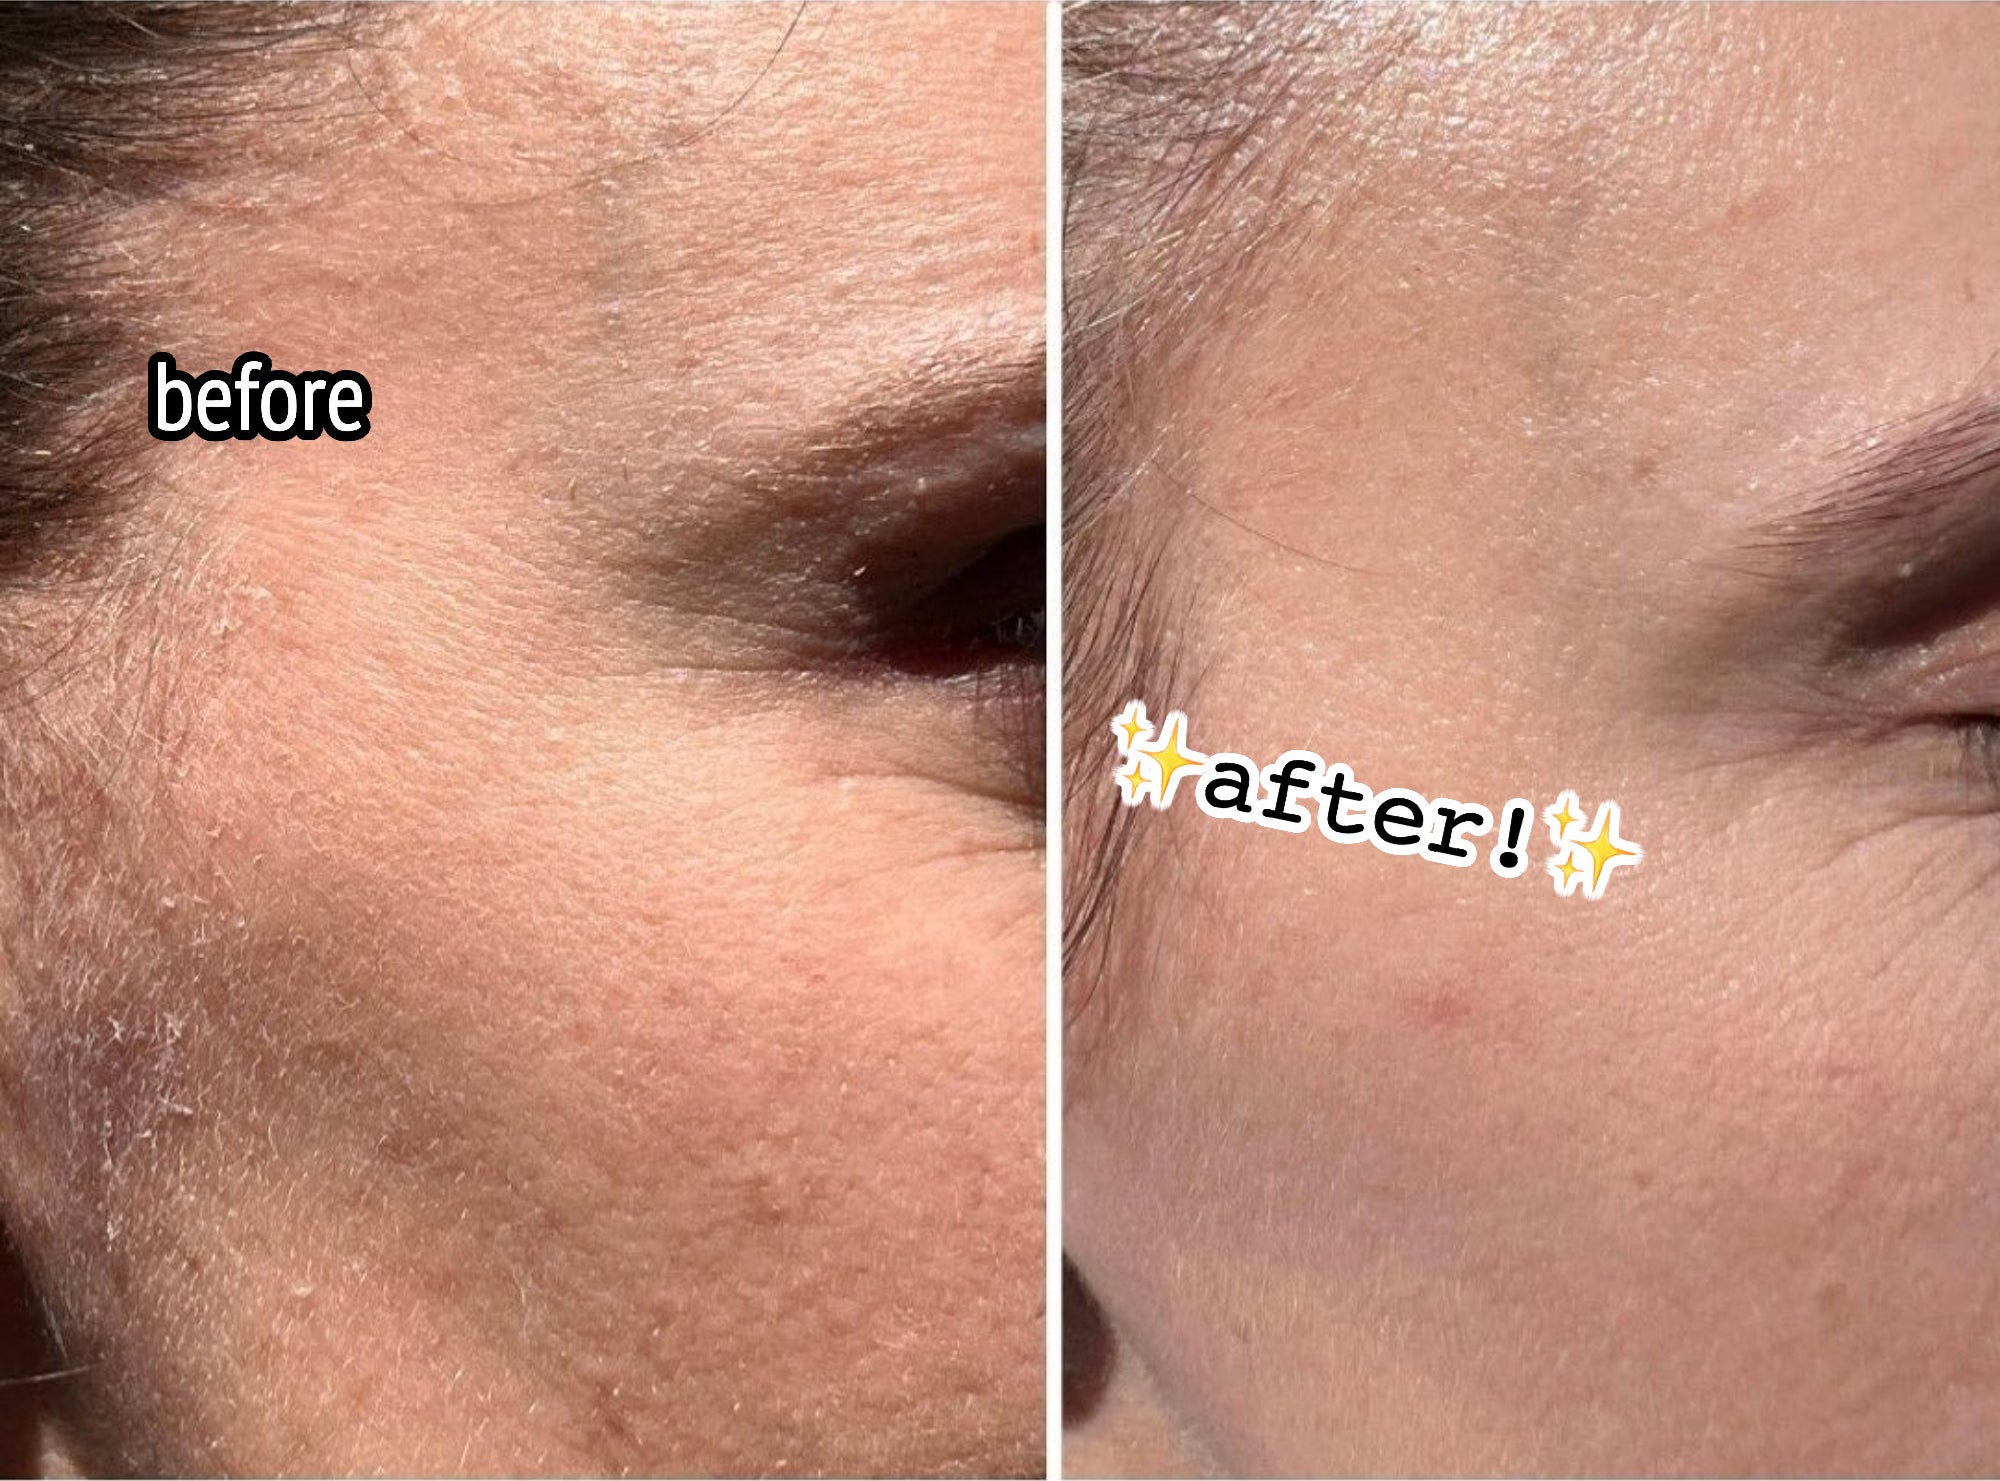 A person&#x27;s skin texture before and after using the product